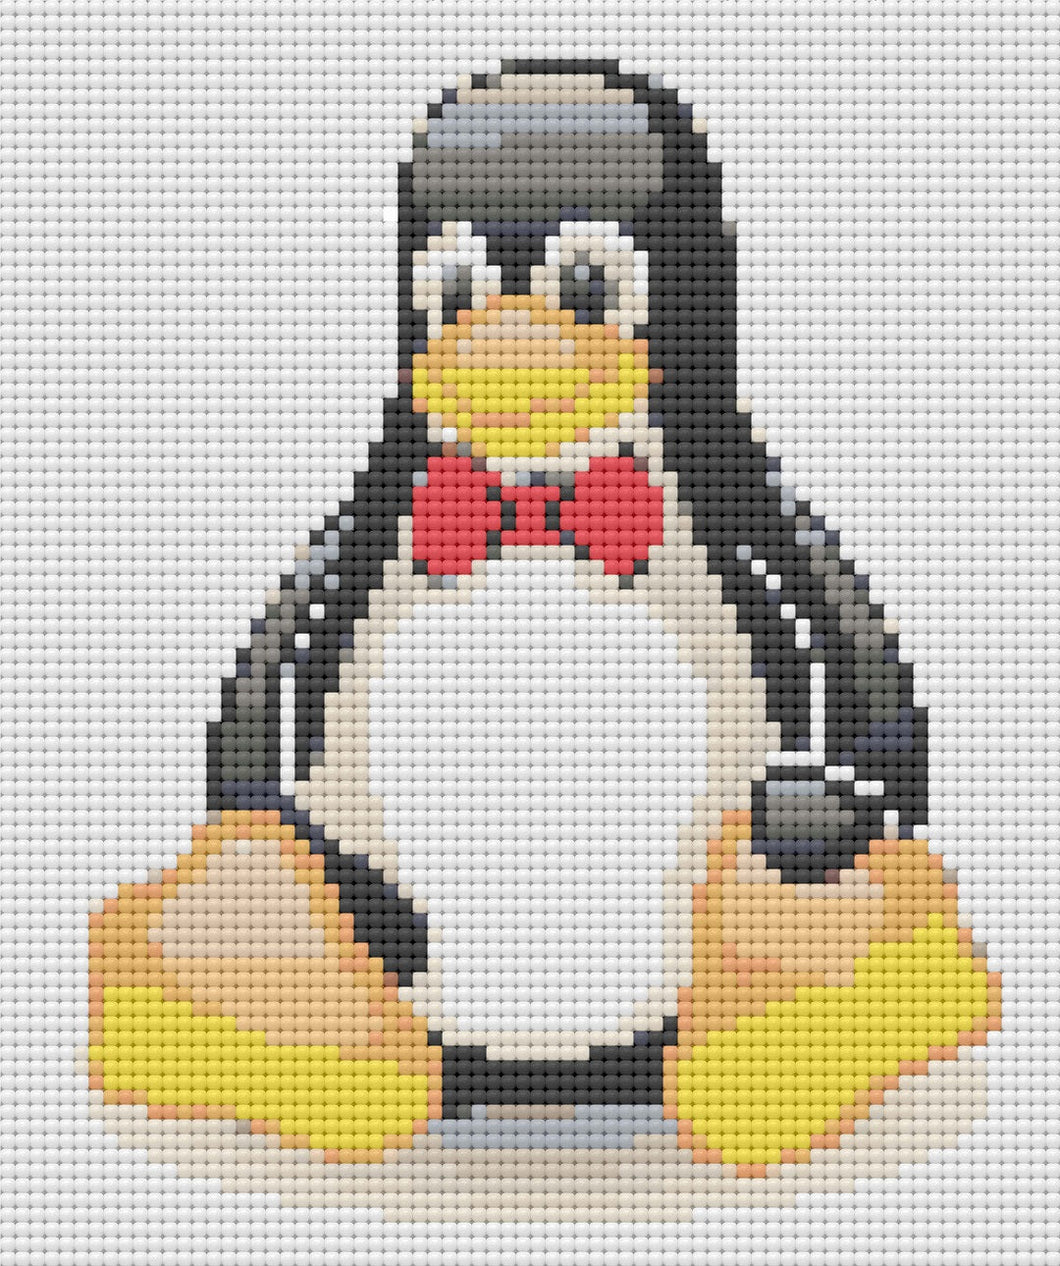 Penguin Diamond Painting Printable Pattern - Round - Art by Sals - A Homespun Hobby